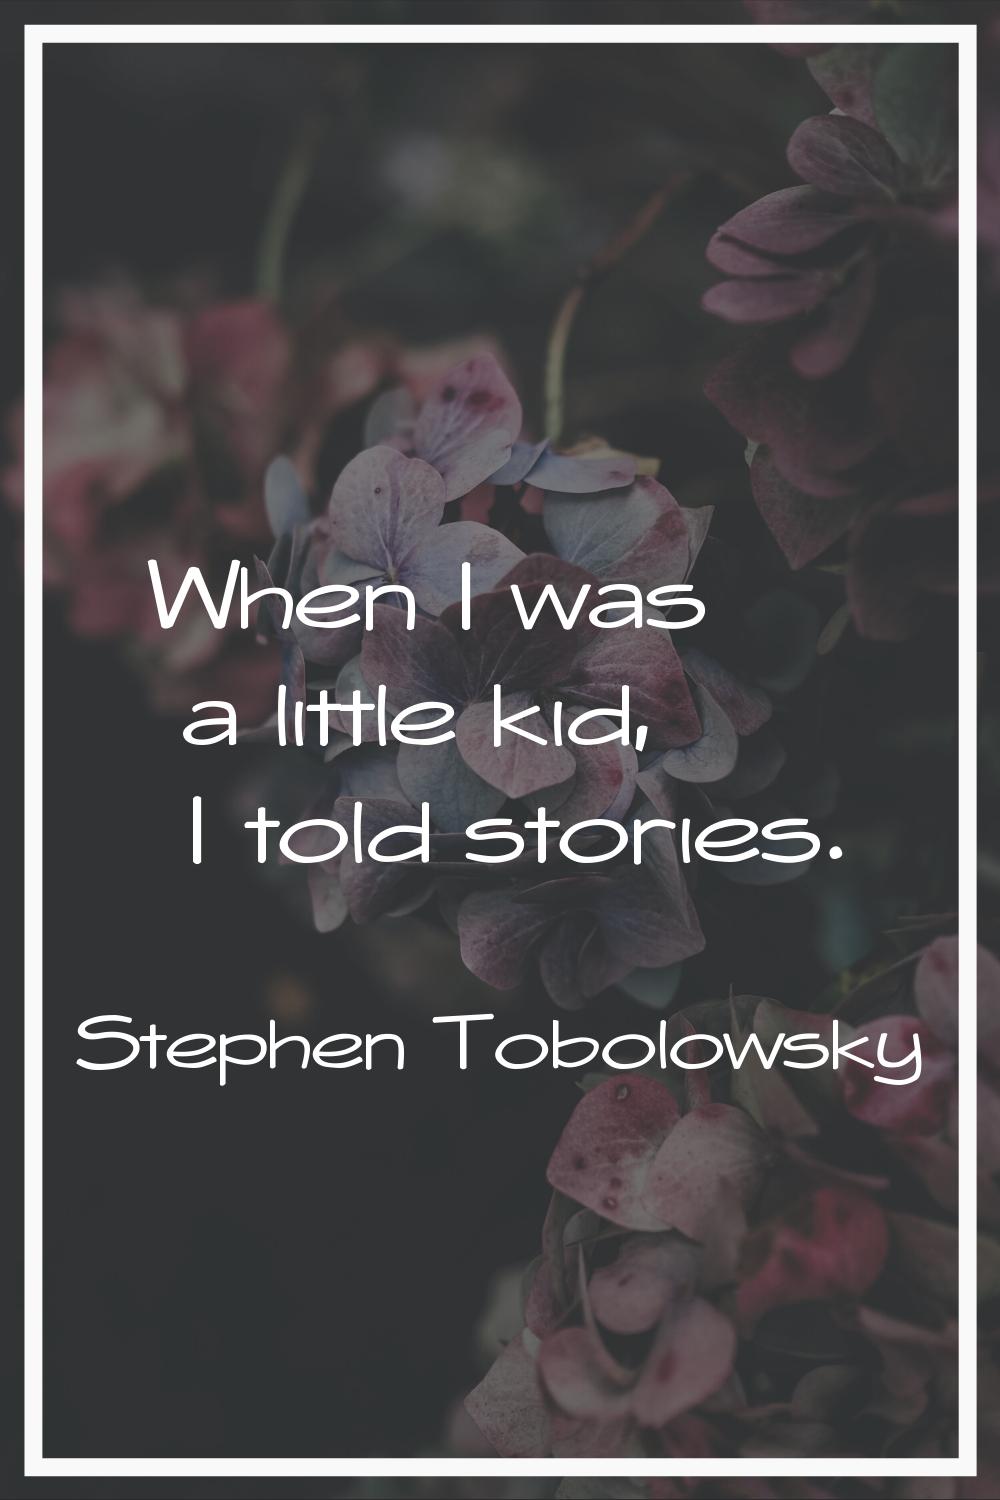 When I was a little kid, I told stories.